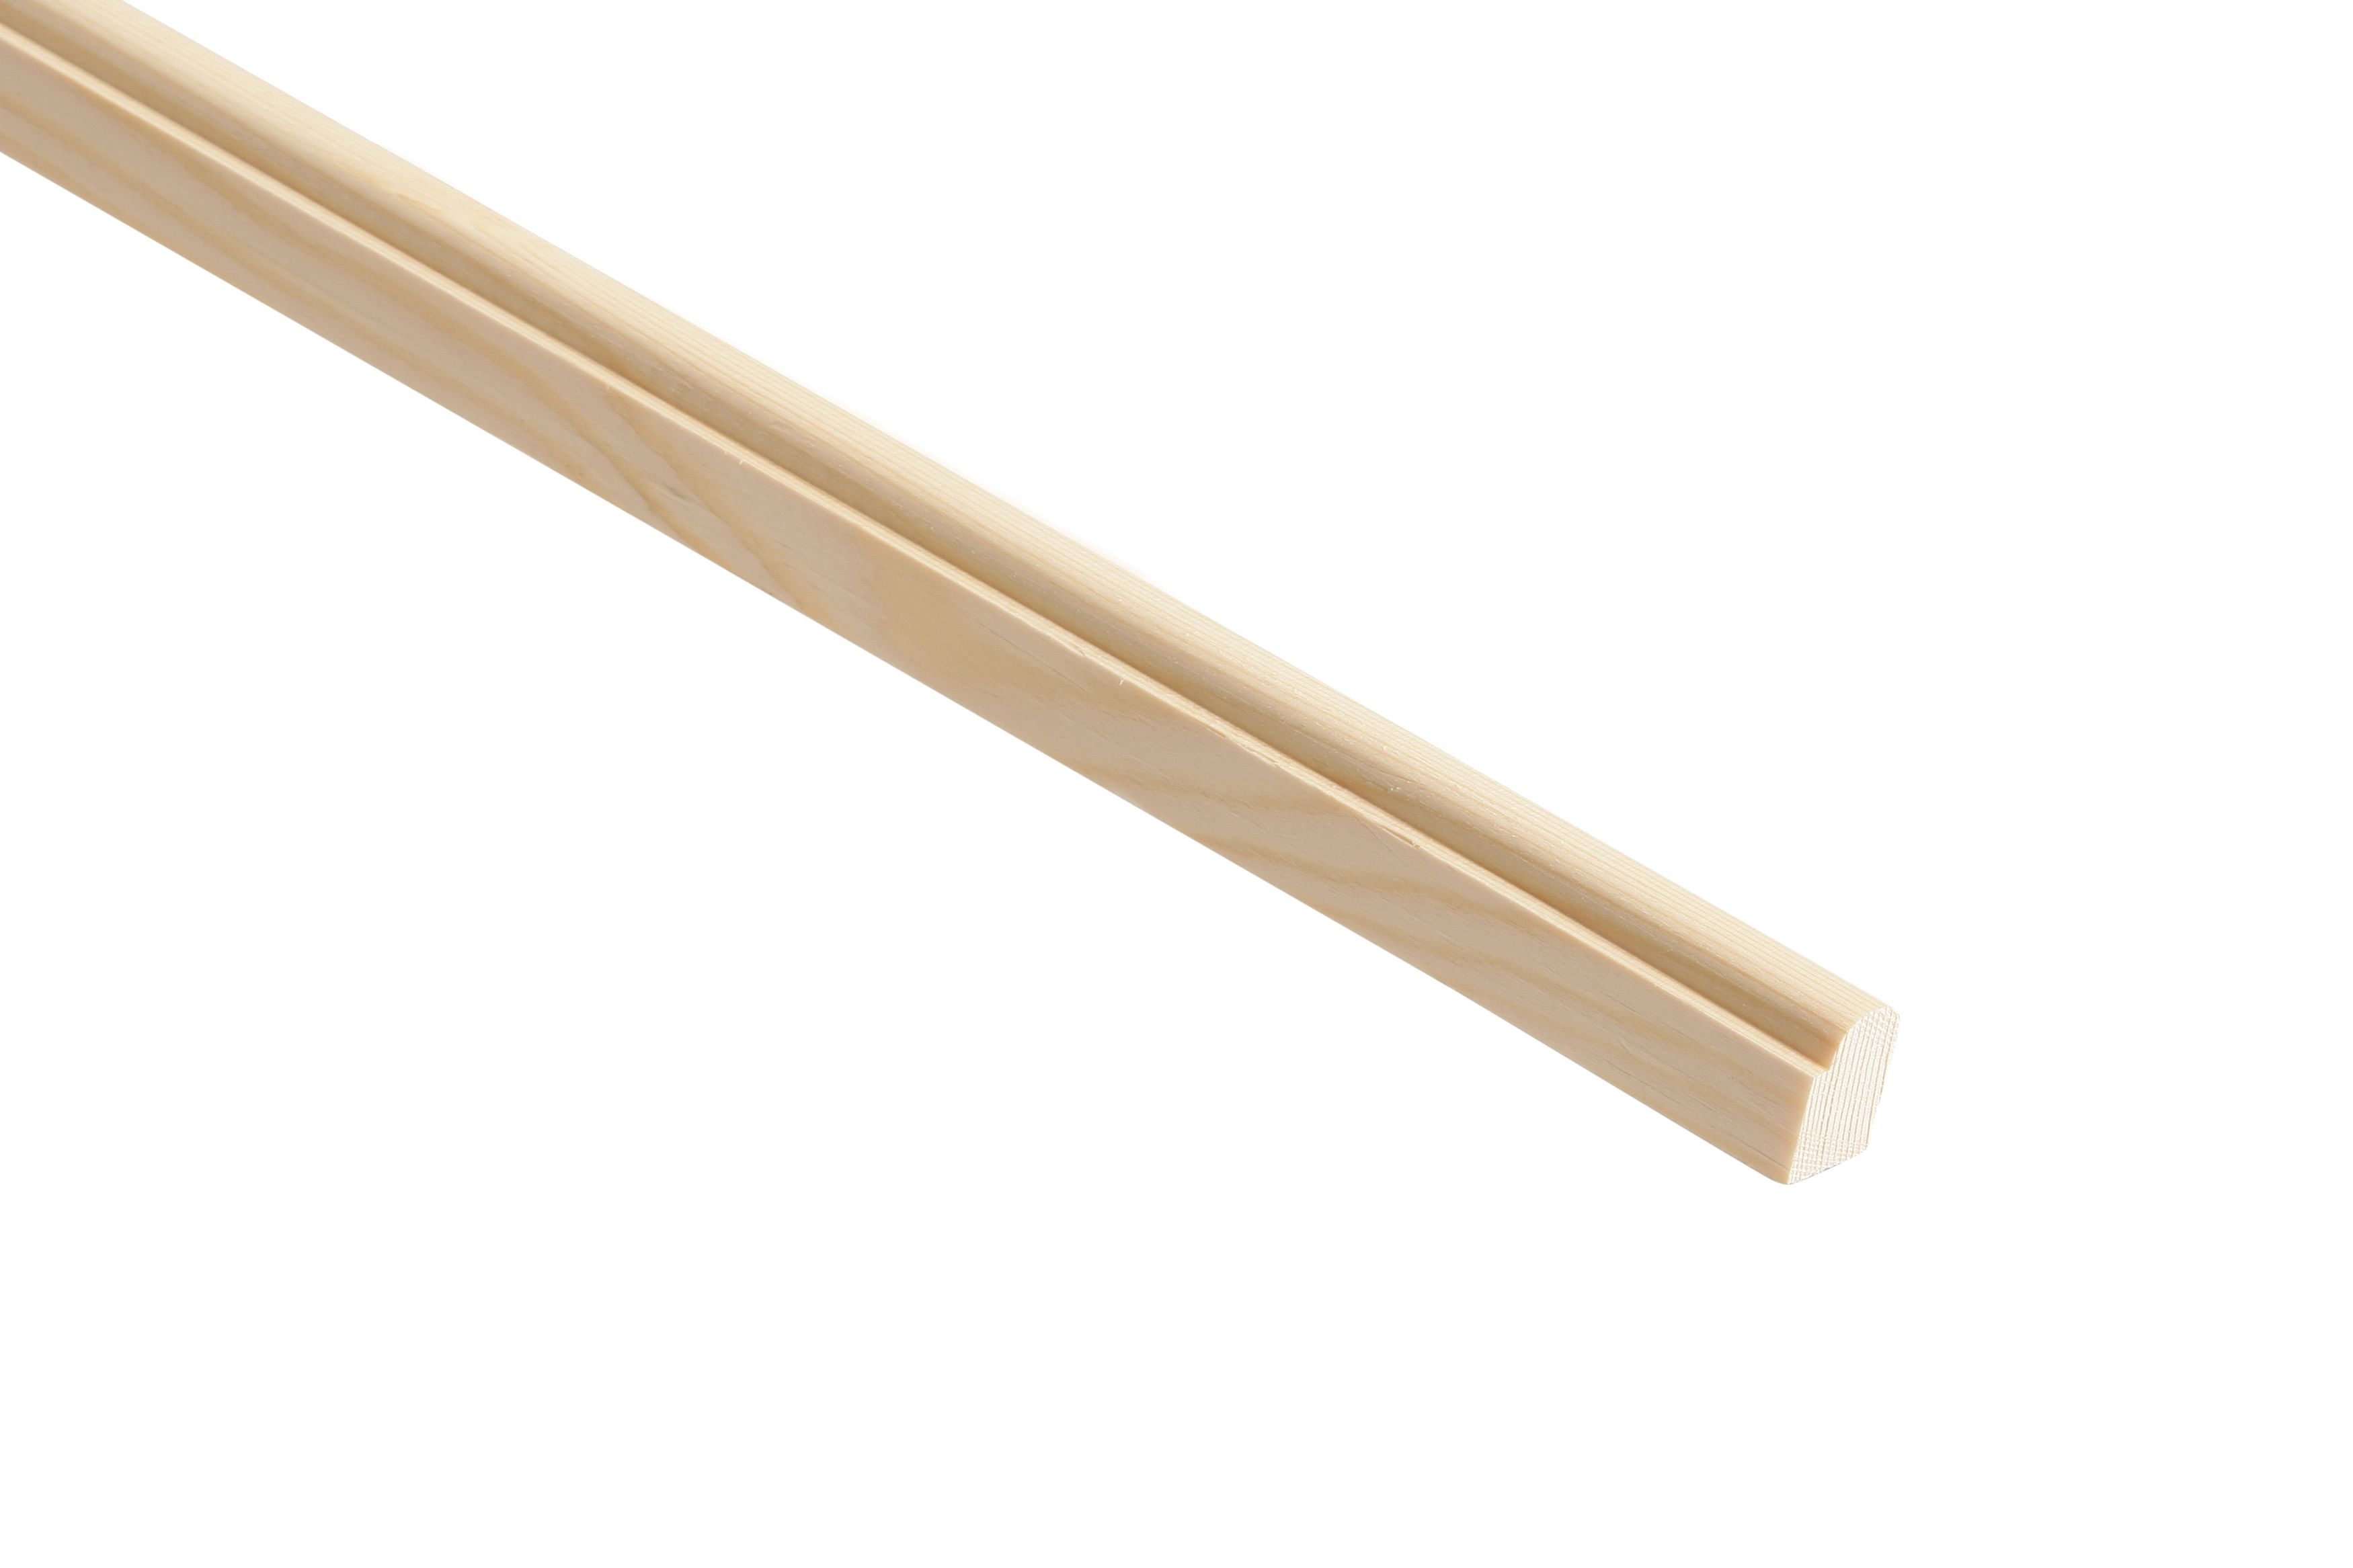 Image of Wickes Pine Staff Bead Moulding - 20 x 15 x 2400mm